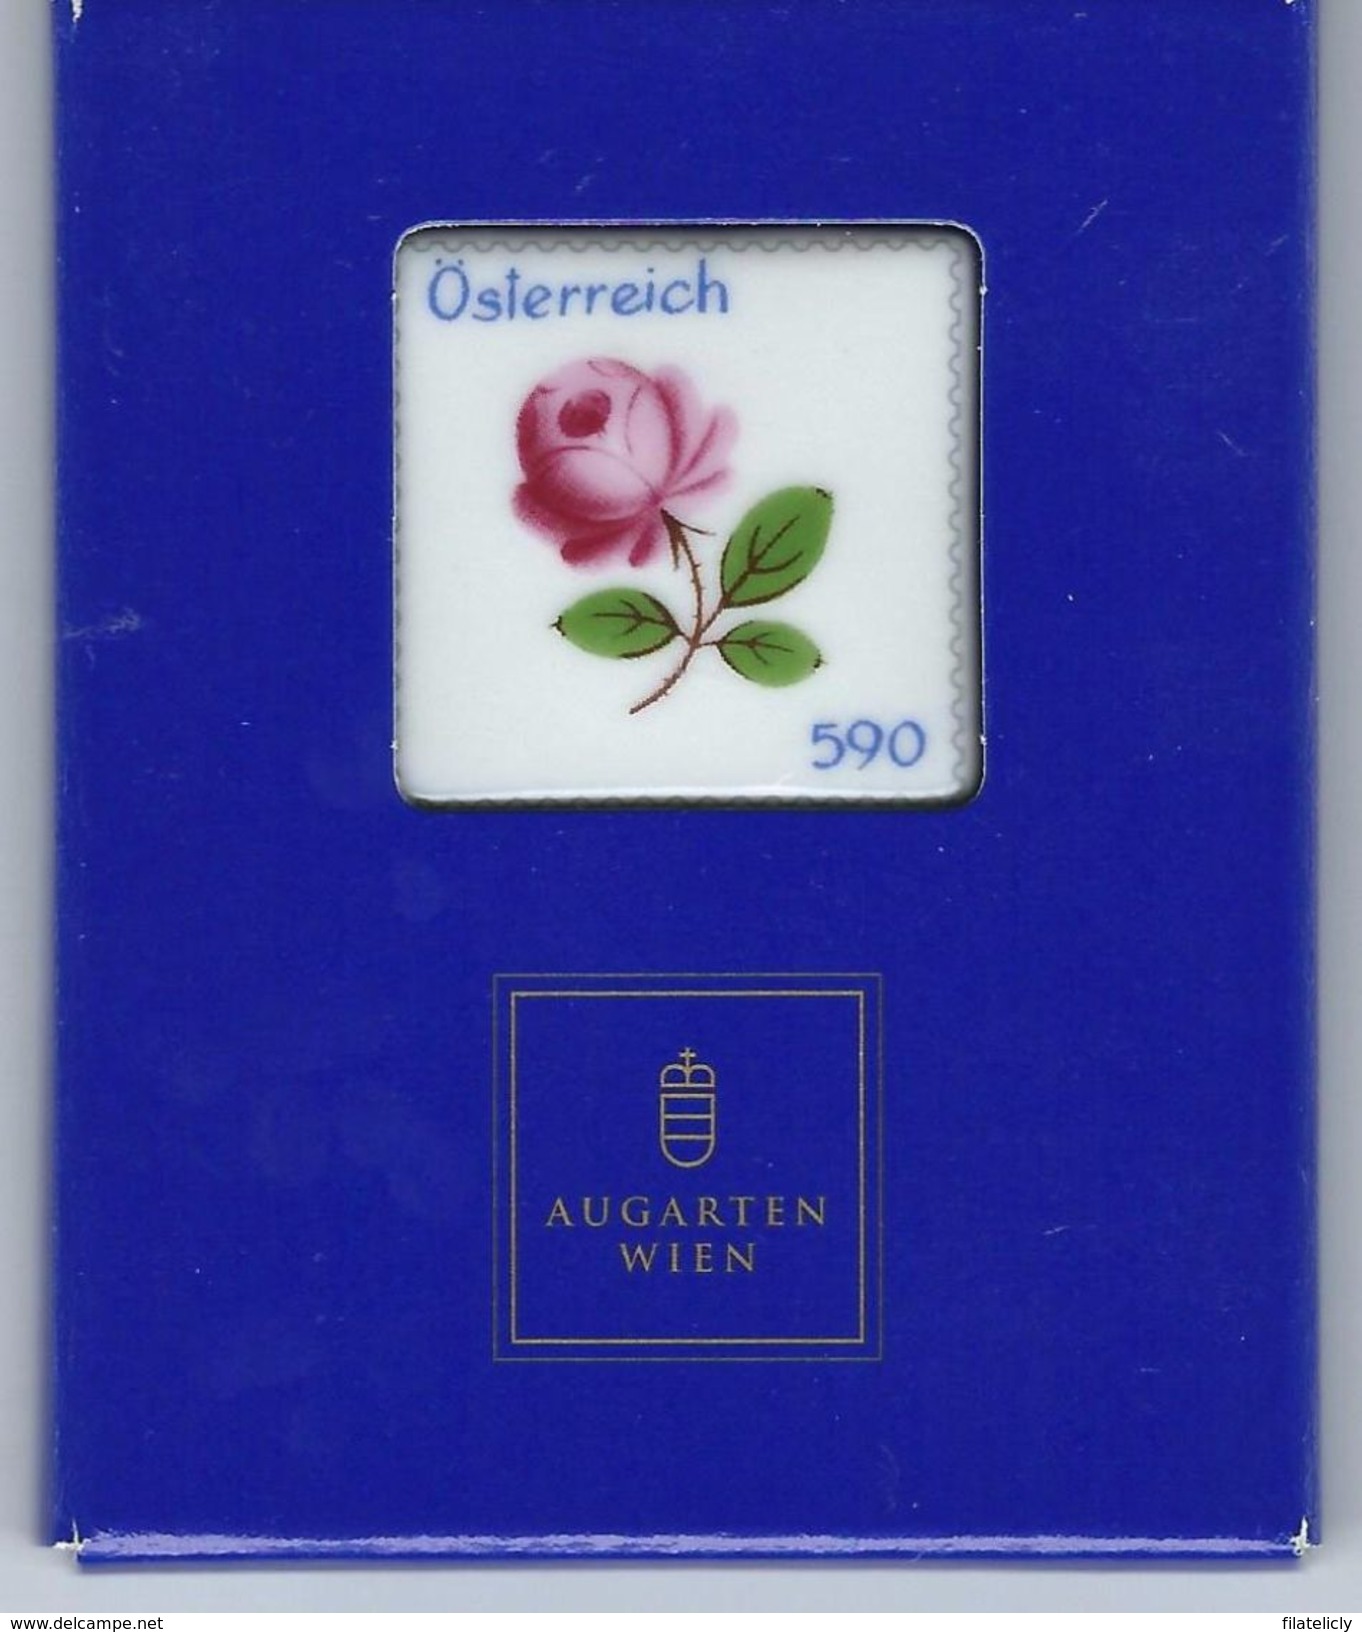 Austria Porcelain Stamp - Issue Date 20 March 2014 - Nuovi